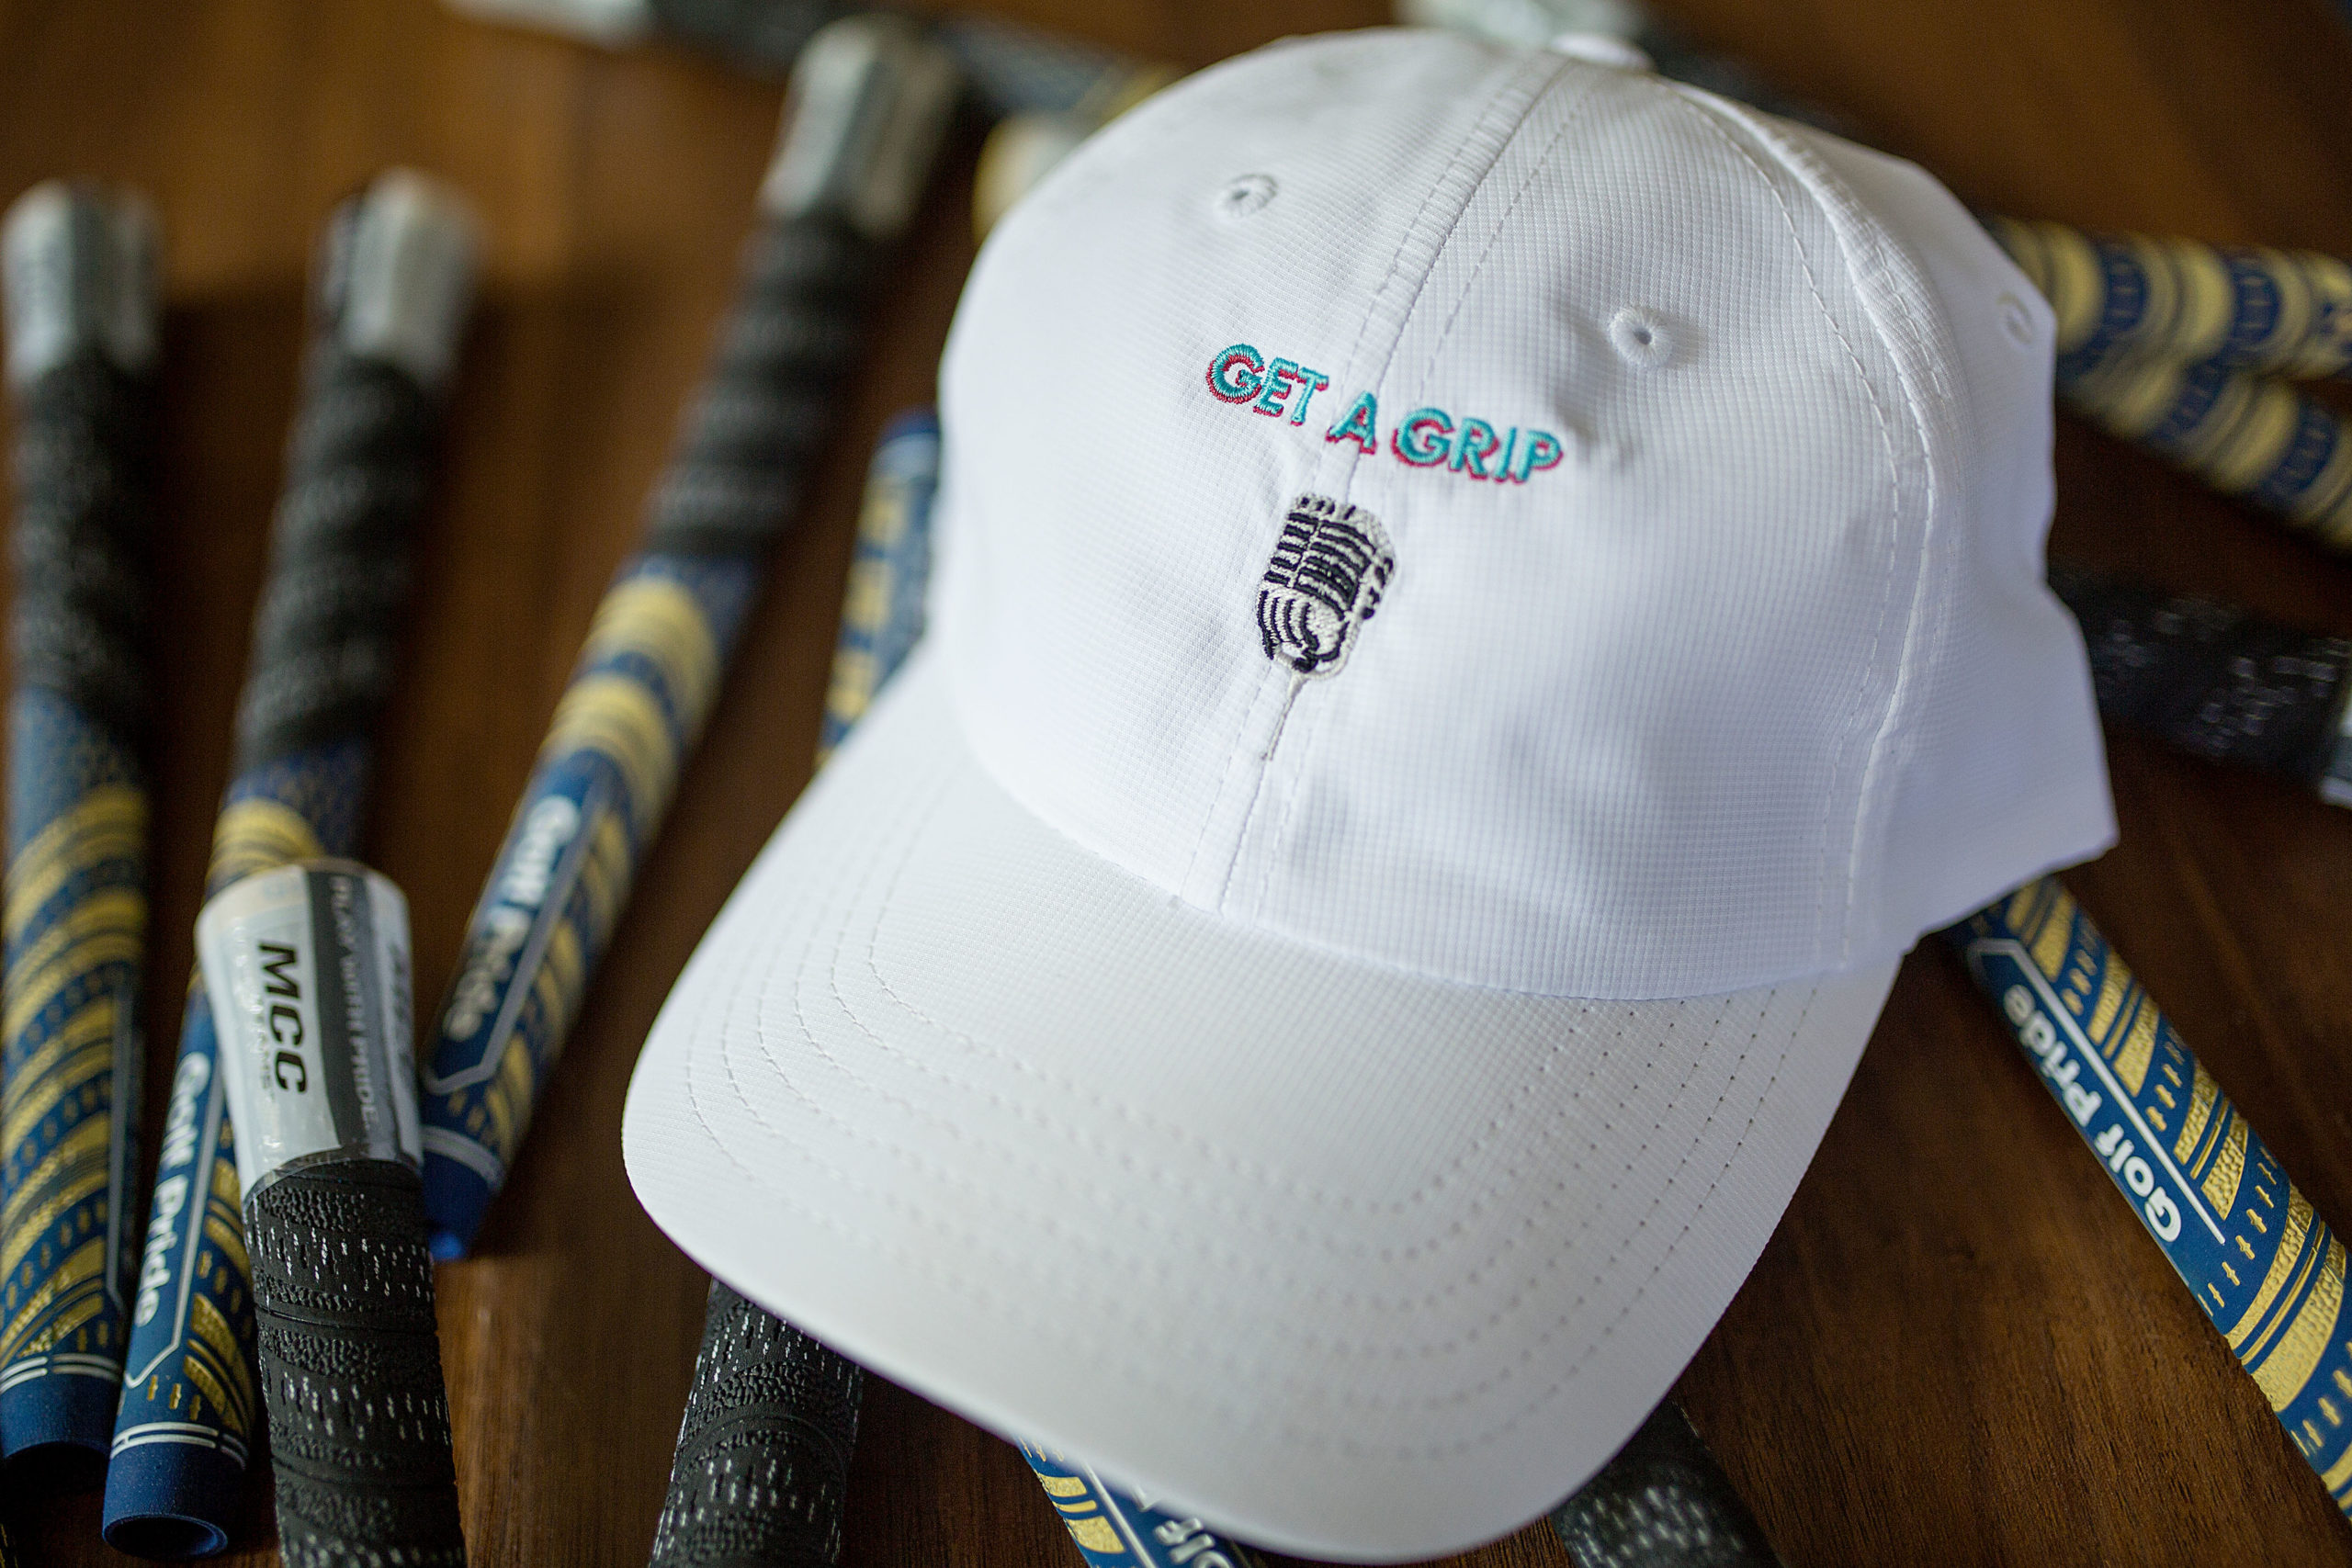 white performance cap with get a grip microphone logo embroider